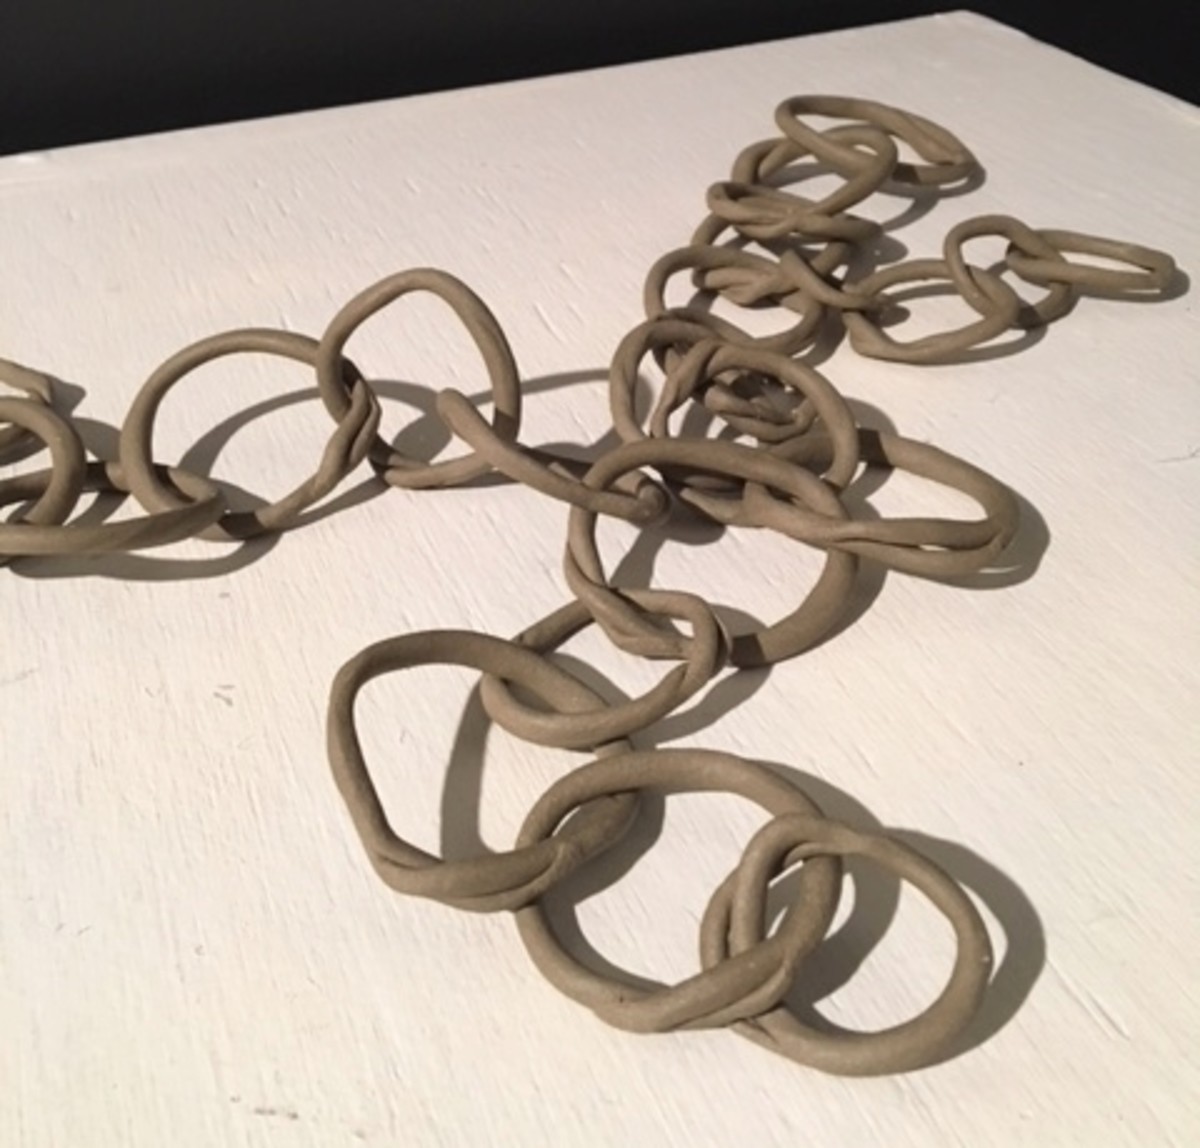 "Link 7" by Hardie Cobbs, hand formed, raw clay links approx. 16" across